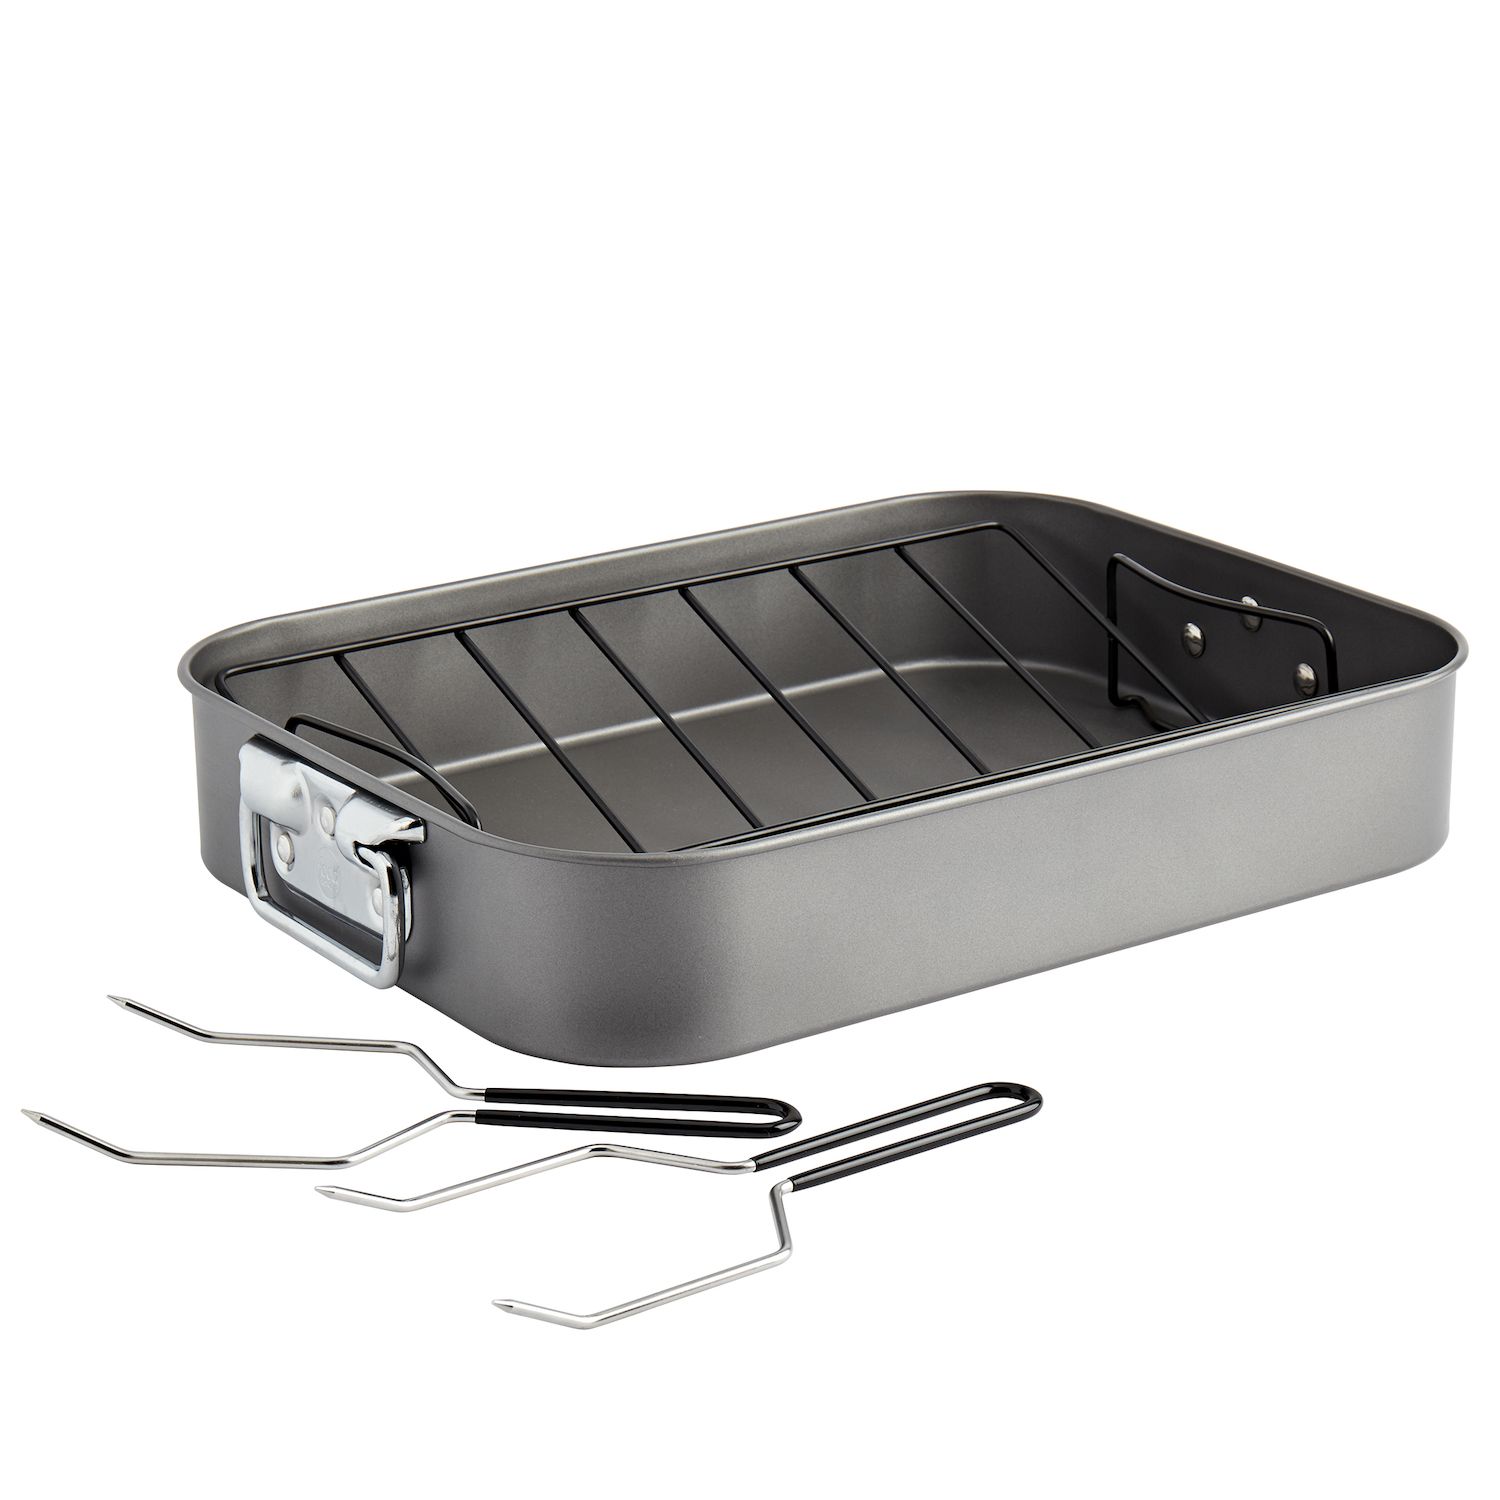 Stainless Steel Roasting Pan with Rack by Lexi Home - 16 - Lexi Home